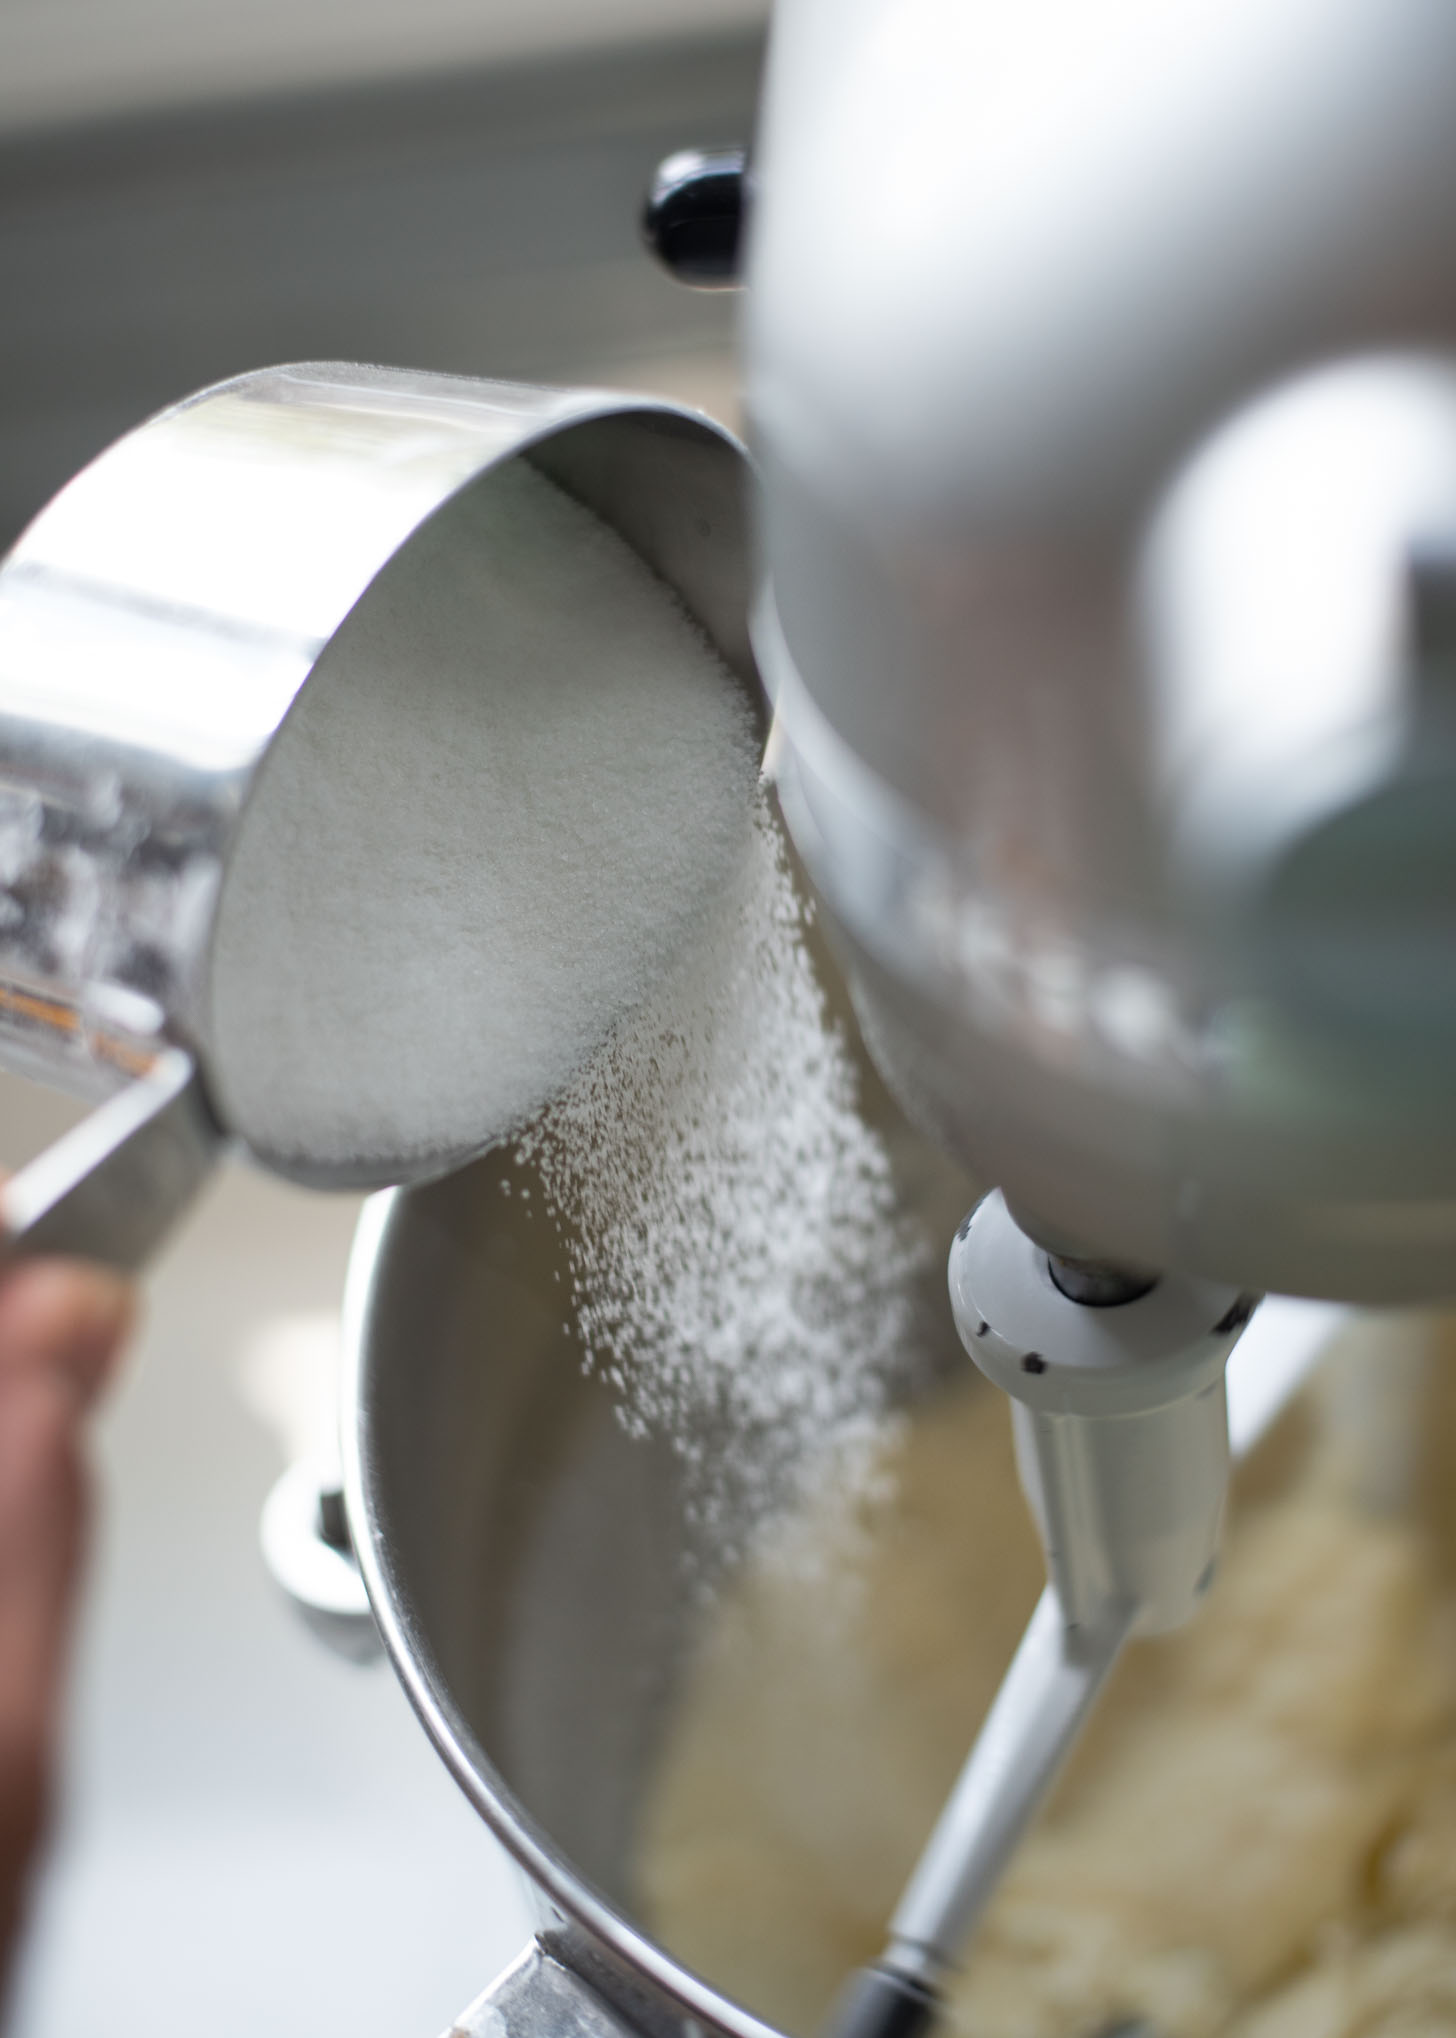 Sugar is being added gradually to creamed butter in a mixer.